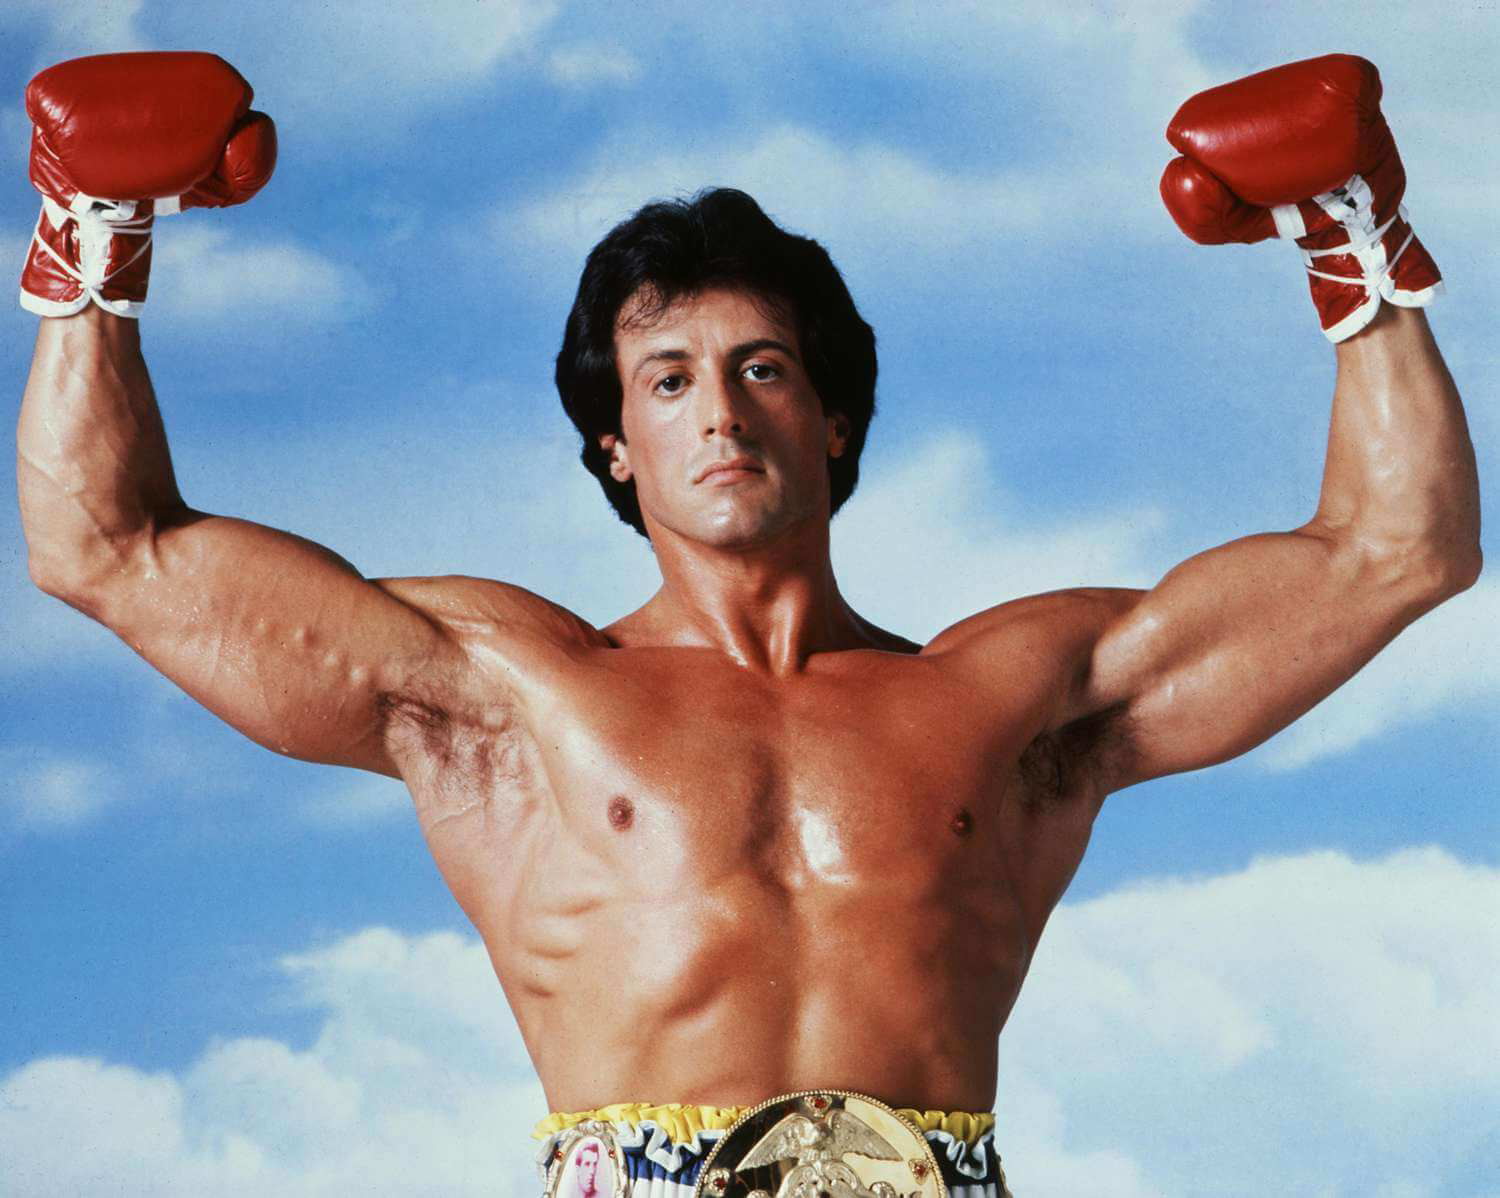 Sylvester Stallone as Rocky Balboa in a still from the Rocky film series